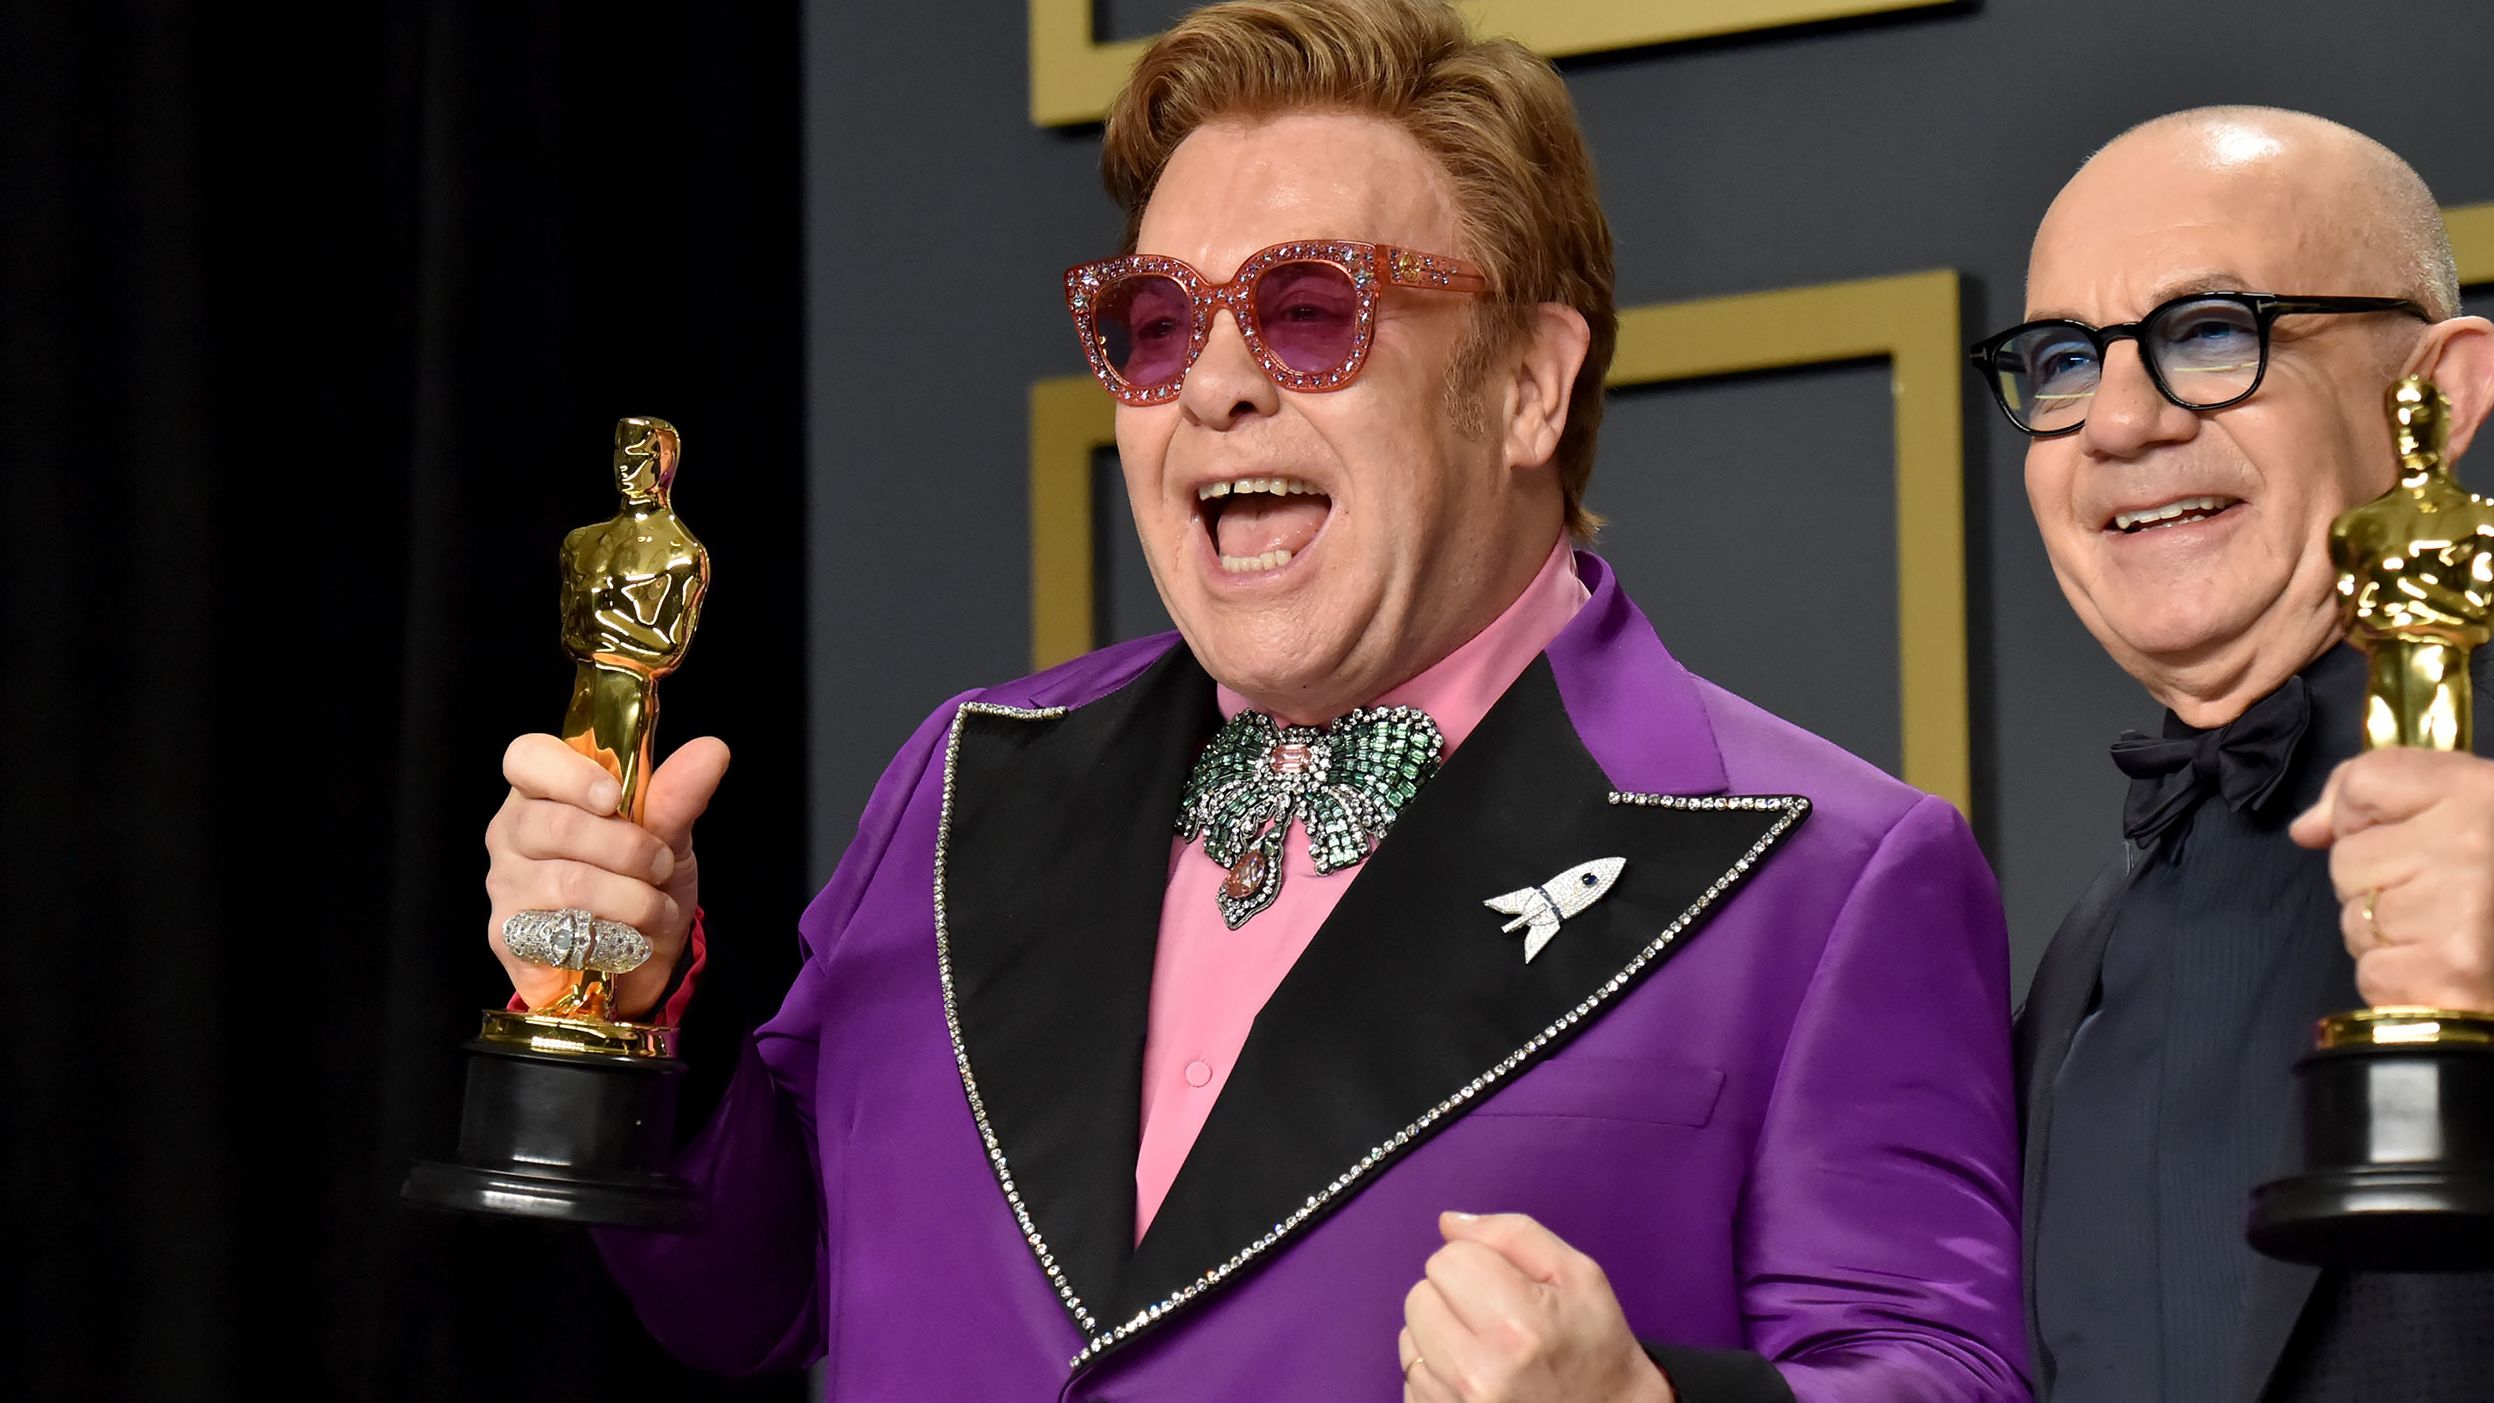 John and Taupin hold the Oscars they won for best original song in 2020. They won for "(I'm Gonna) Love Me Again" from the John biopic "Rocketman."